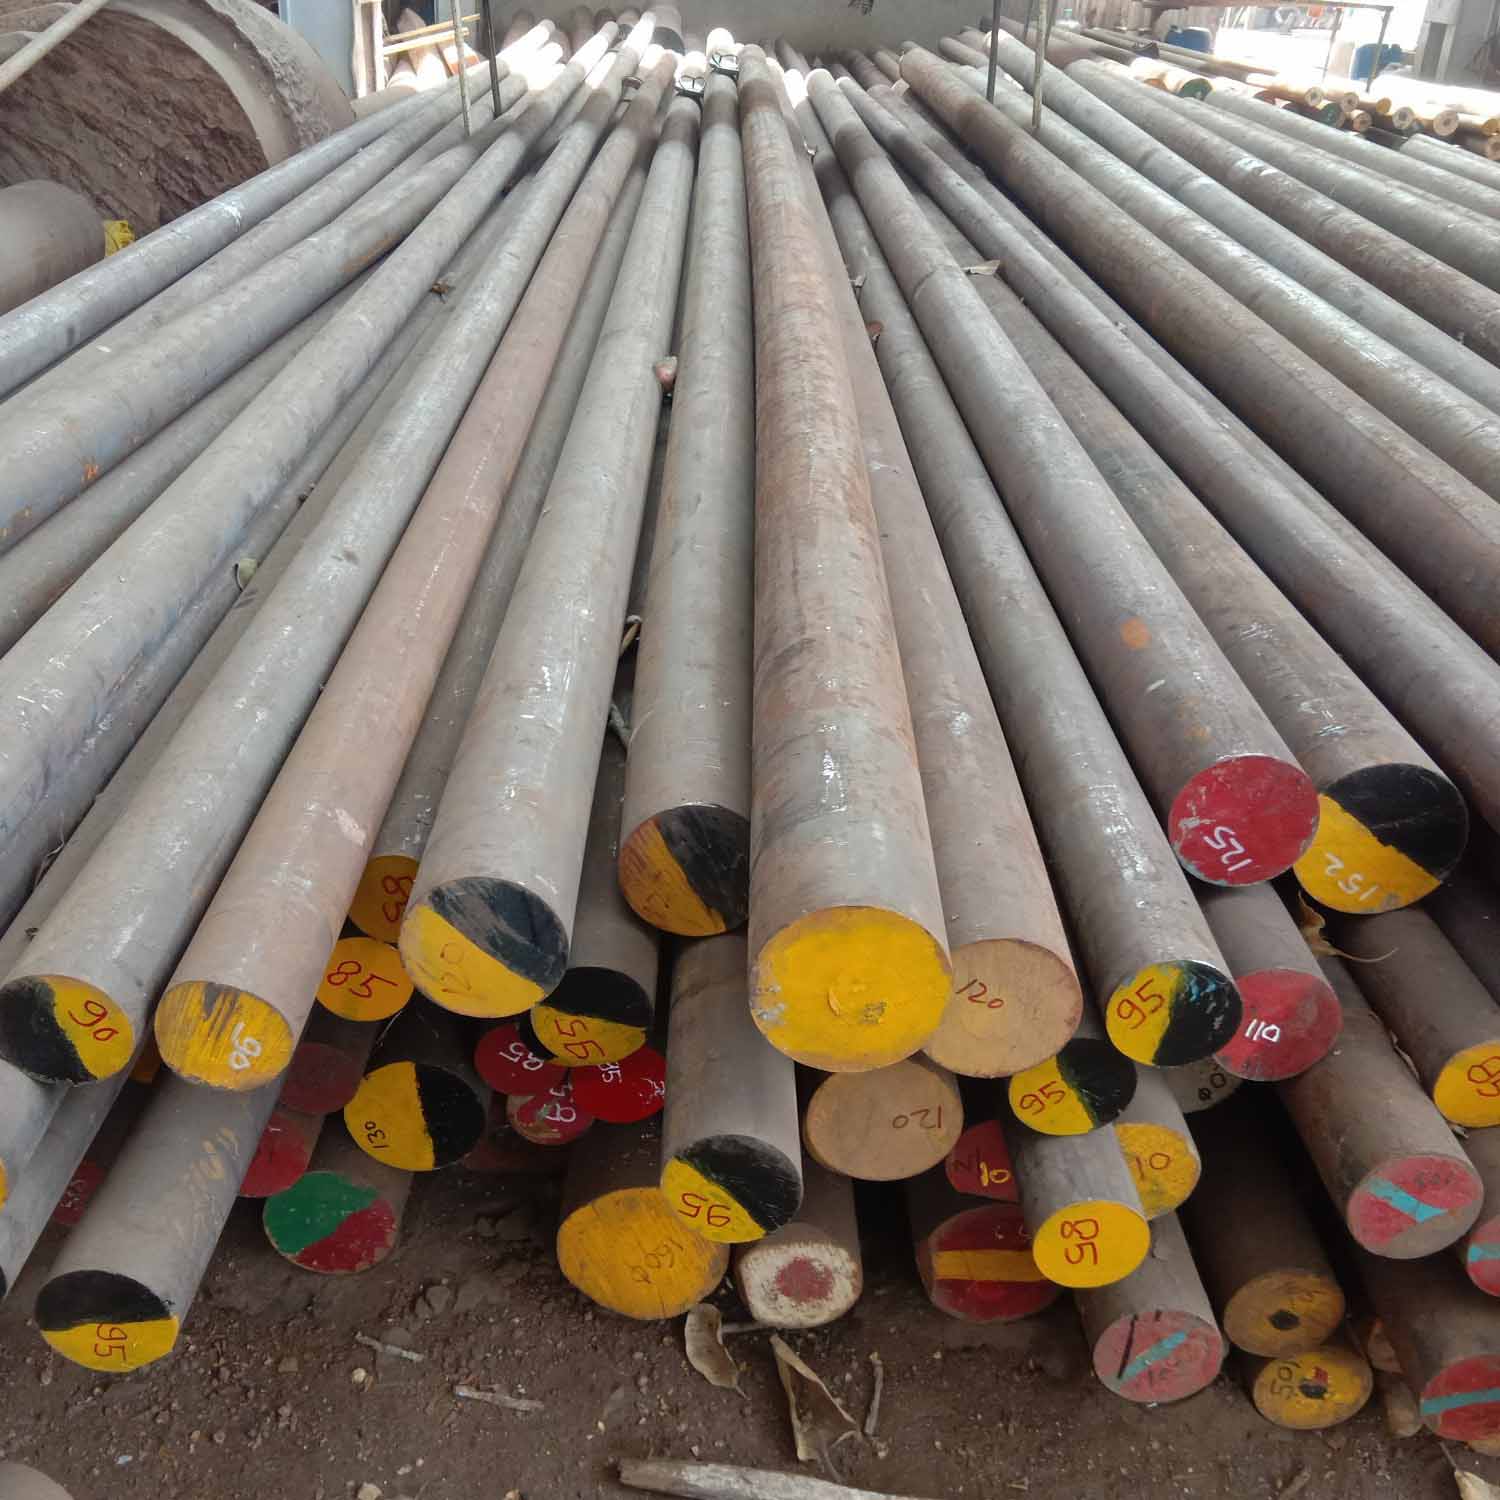 EN39B Alloy Steel Round Bars Manufacturers, Suppliers, Importers, Dealers in Mumbai India